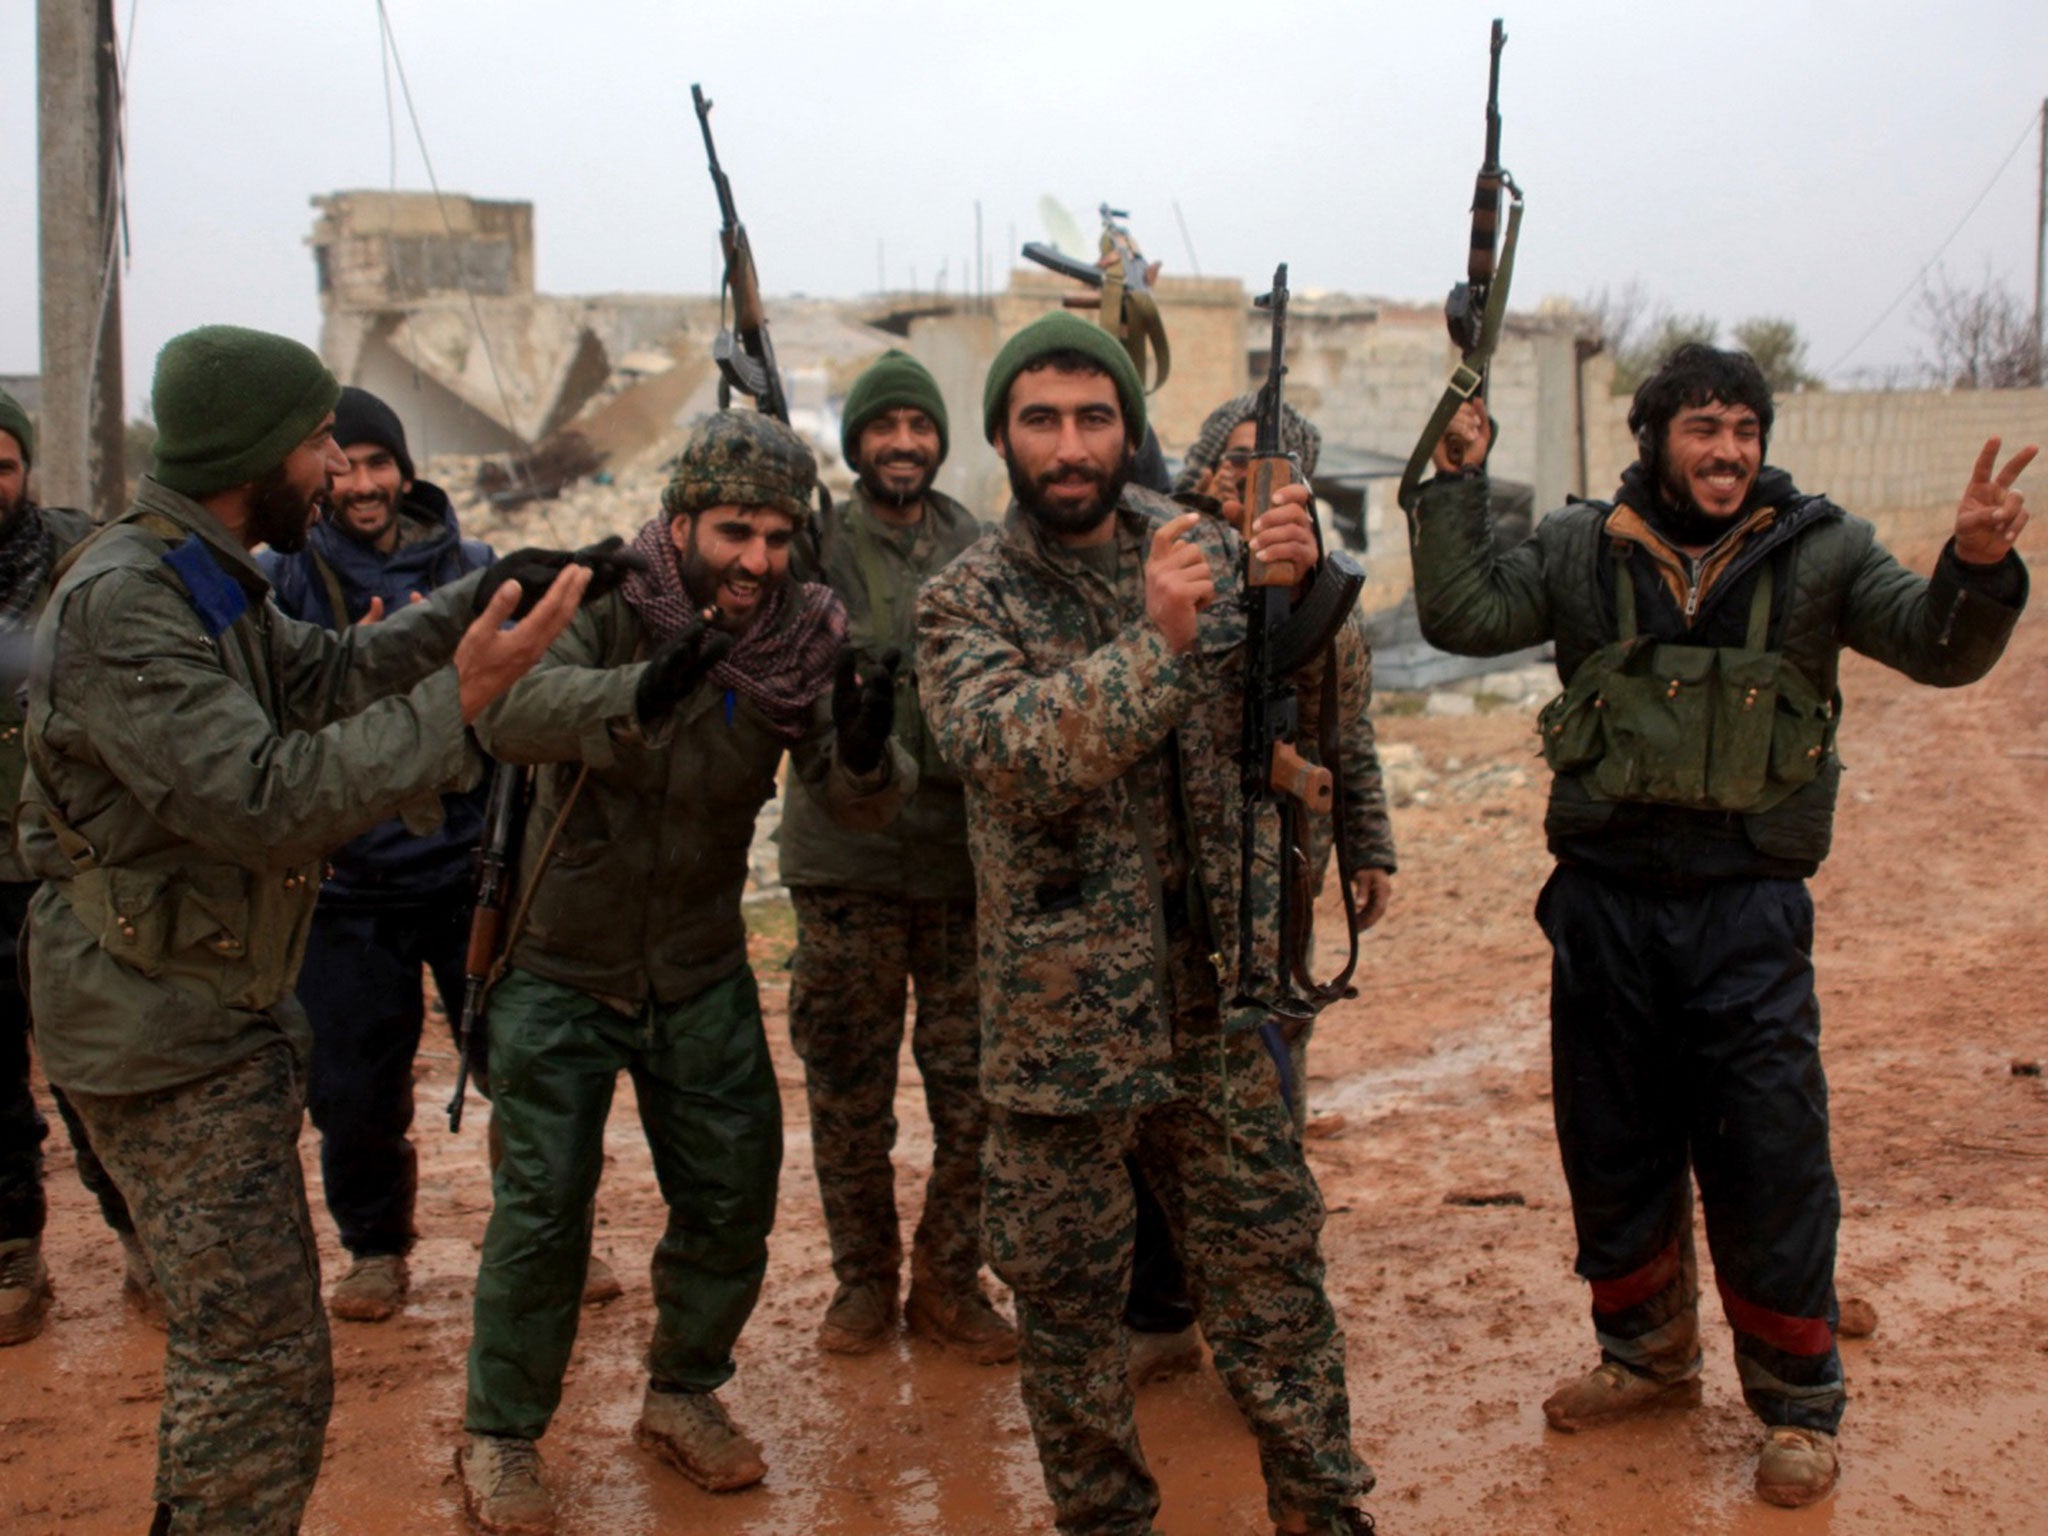 Syrian government soldiers celebrate after taking control of the village of Ratian, north of the embattled city of Aleppo, from rebel fighters on 6 February, 2016